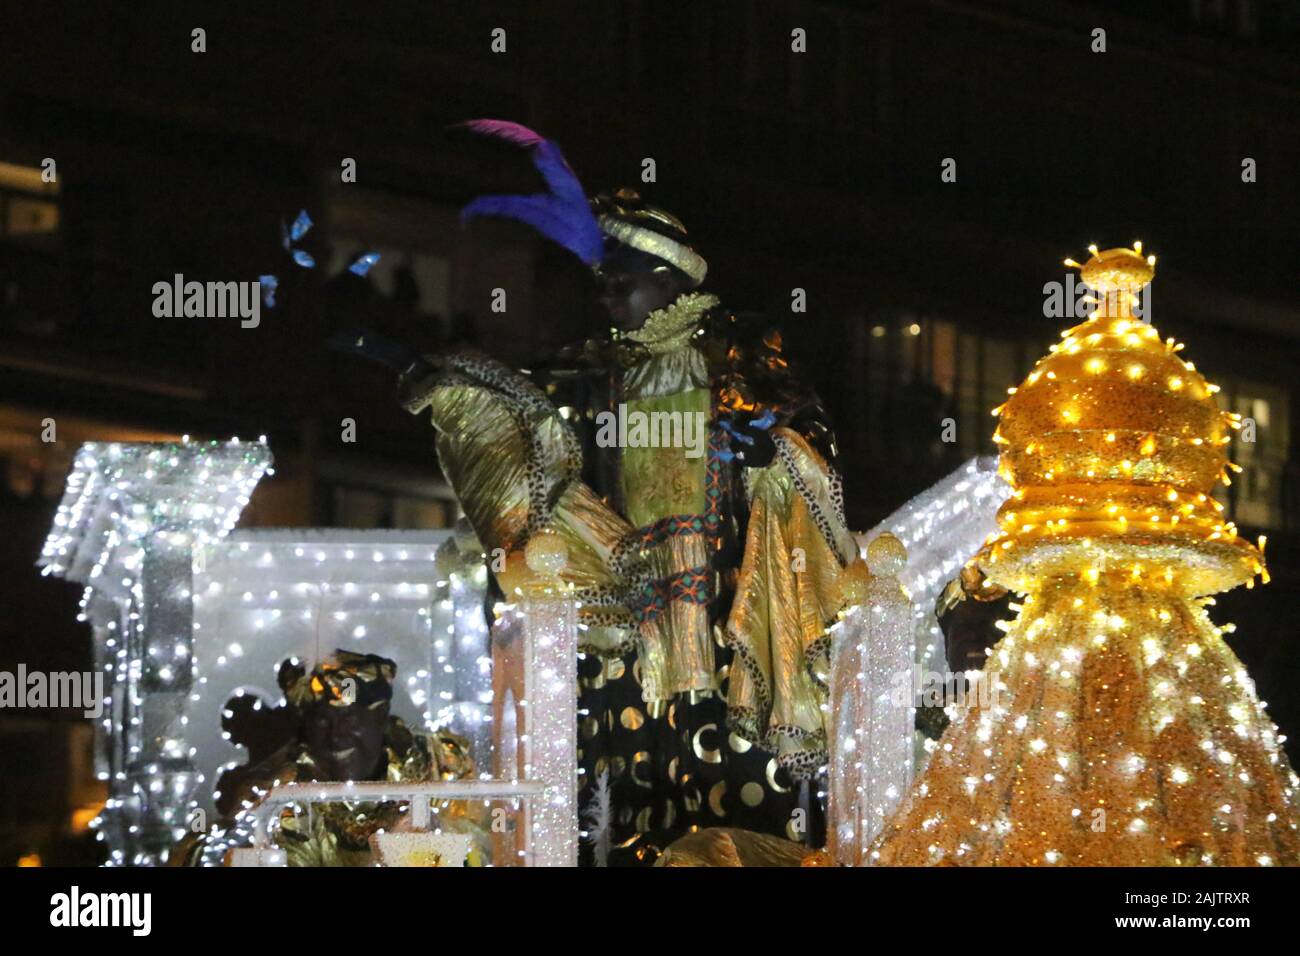 Malaga, Spain. January 5, 2020: 5 January 2020 (Malaga ) More than 2,000 people participate in a procession of 14 floats, most of them new. More than 10,000 gluten-free sweets are distributed along the route. Their Majesties left the Alcazaba to be received by the mayor and the councillors, so that the parade will begin at six o'clock in the afternoon at the gates of the City Hall of Malaga. Credit: Lorenzo Carnero/ZUMA Wire/Alamy Live News Stock Photo